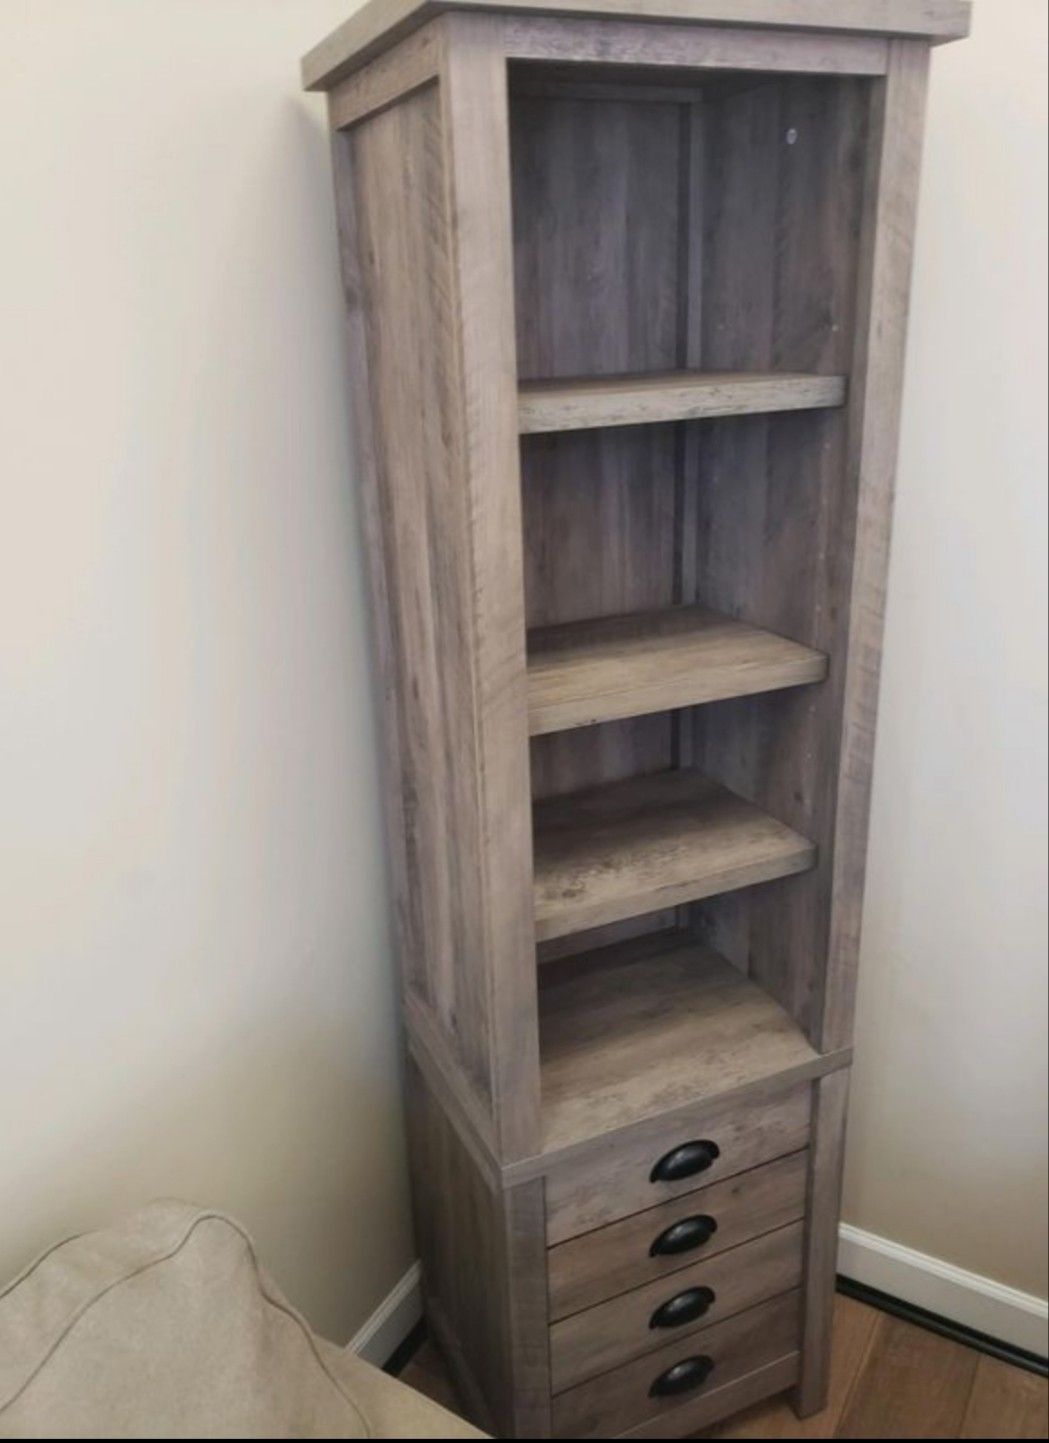 All must go | Brand New Accent Shelving Unit with Storage | $85, Buy 2 for $160